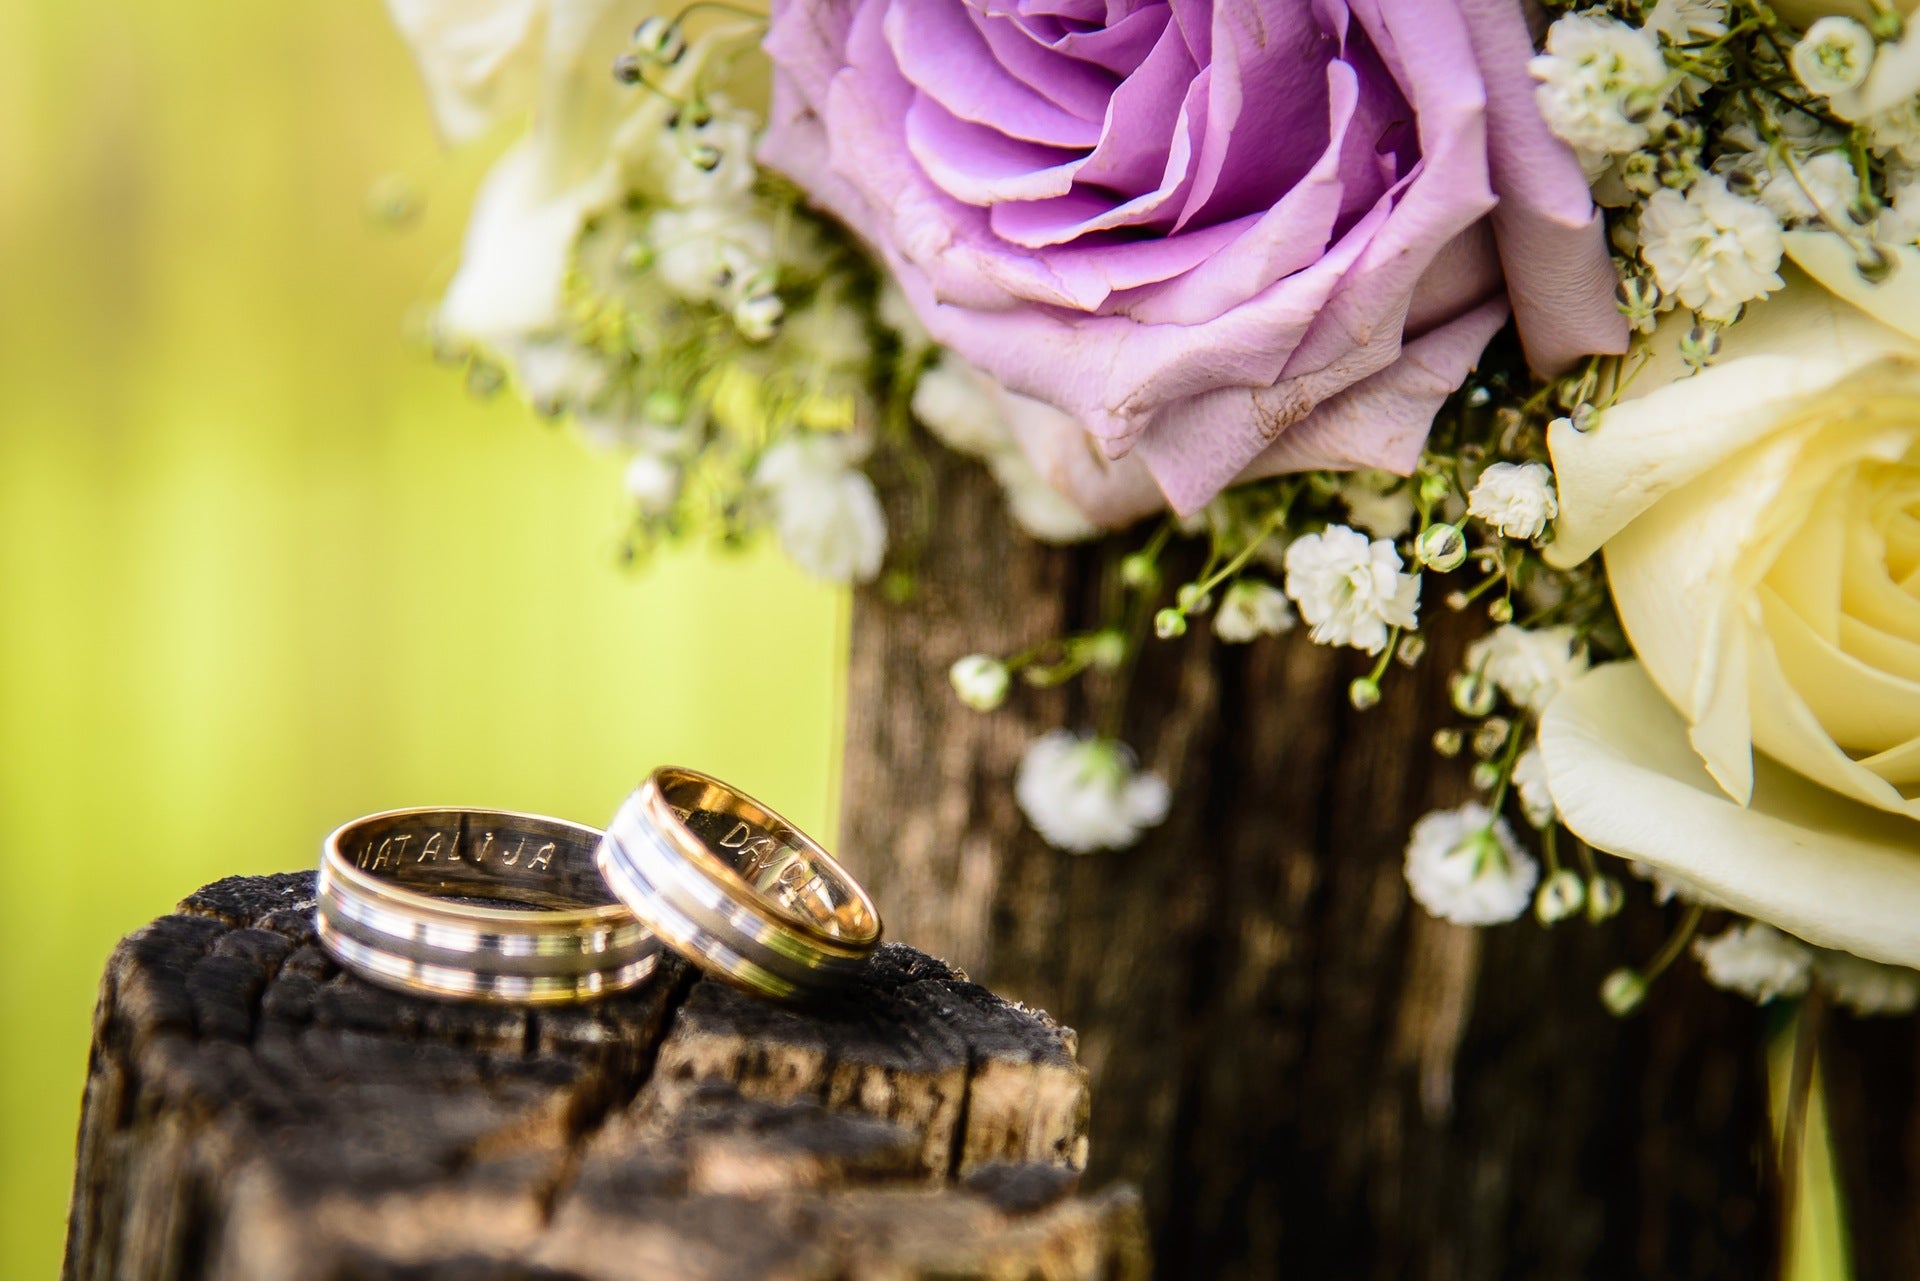 5 Ways to Save Money on Your Wedding